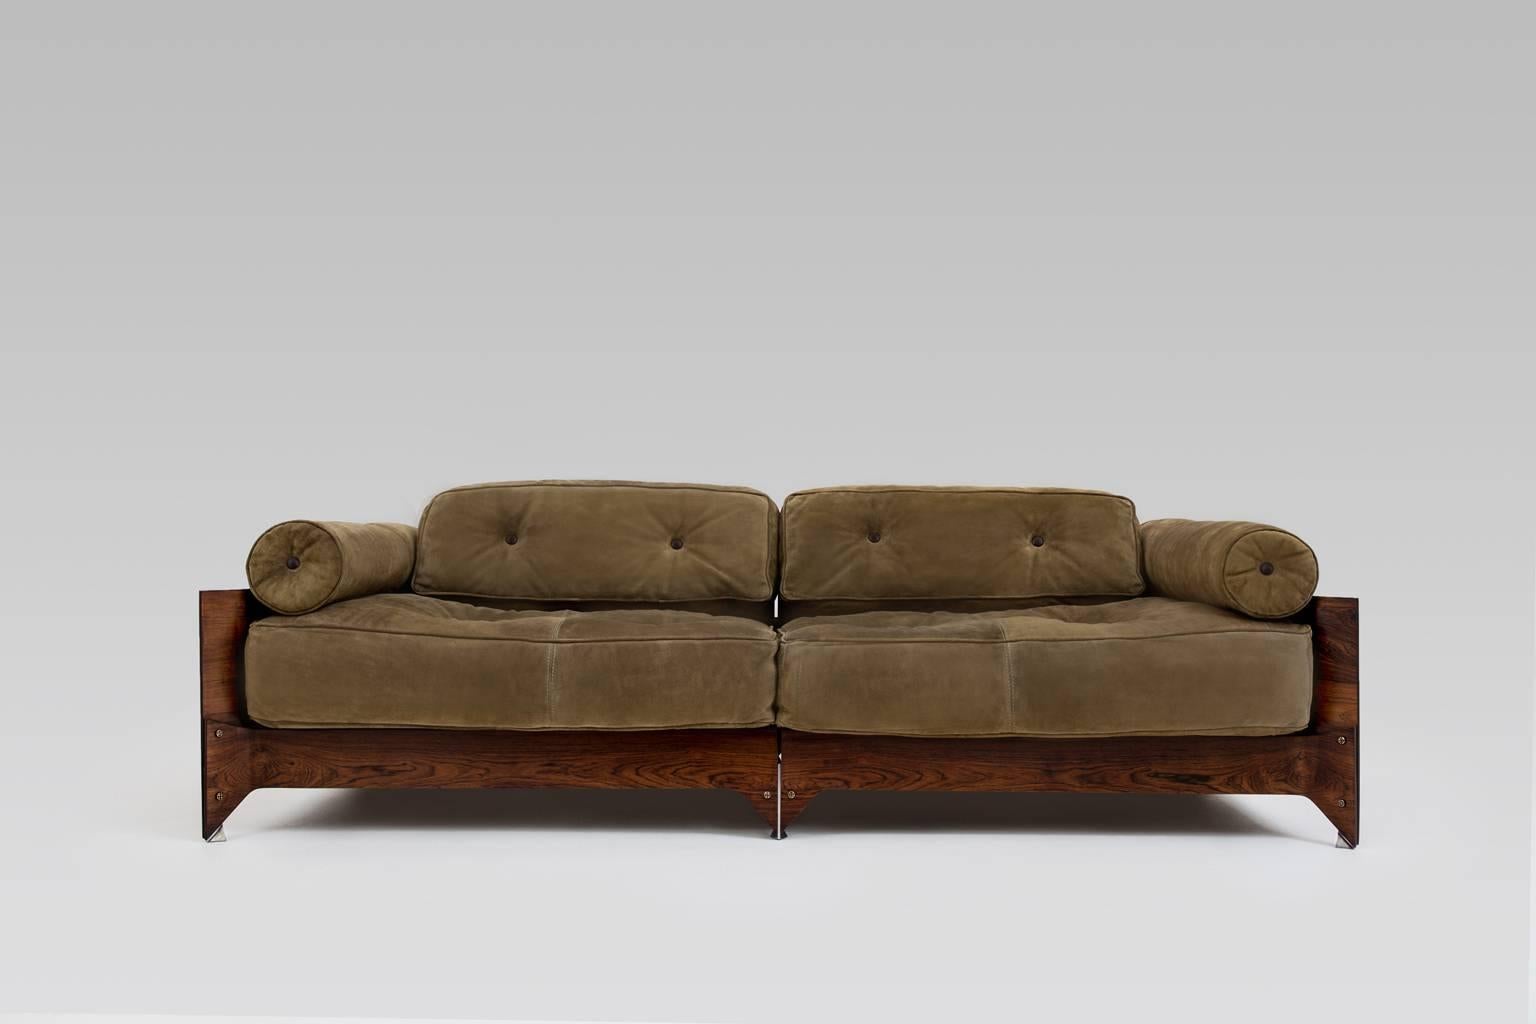 Rare original ‘Brasiliana’ sofa by Jorge Zalszupin for L’Atelier. Designed in 1965 by Jorge Zalszupin as an homage to the capital Brasilia, designed by Oscar Niemeyer. Made from the finest Rosewood. Features the original green suede cushions which